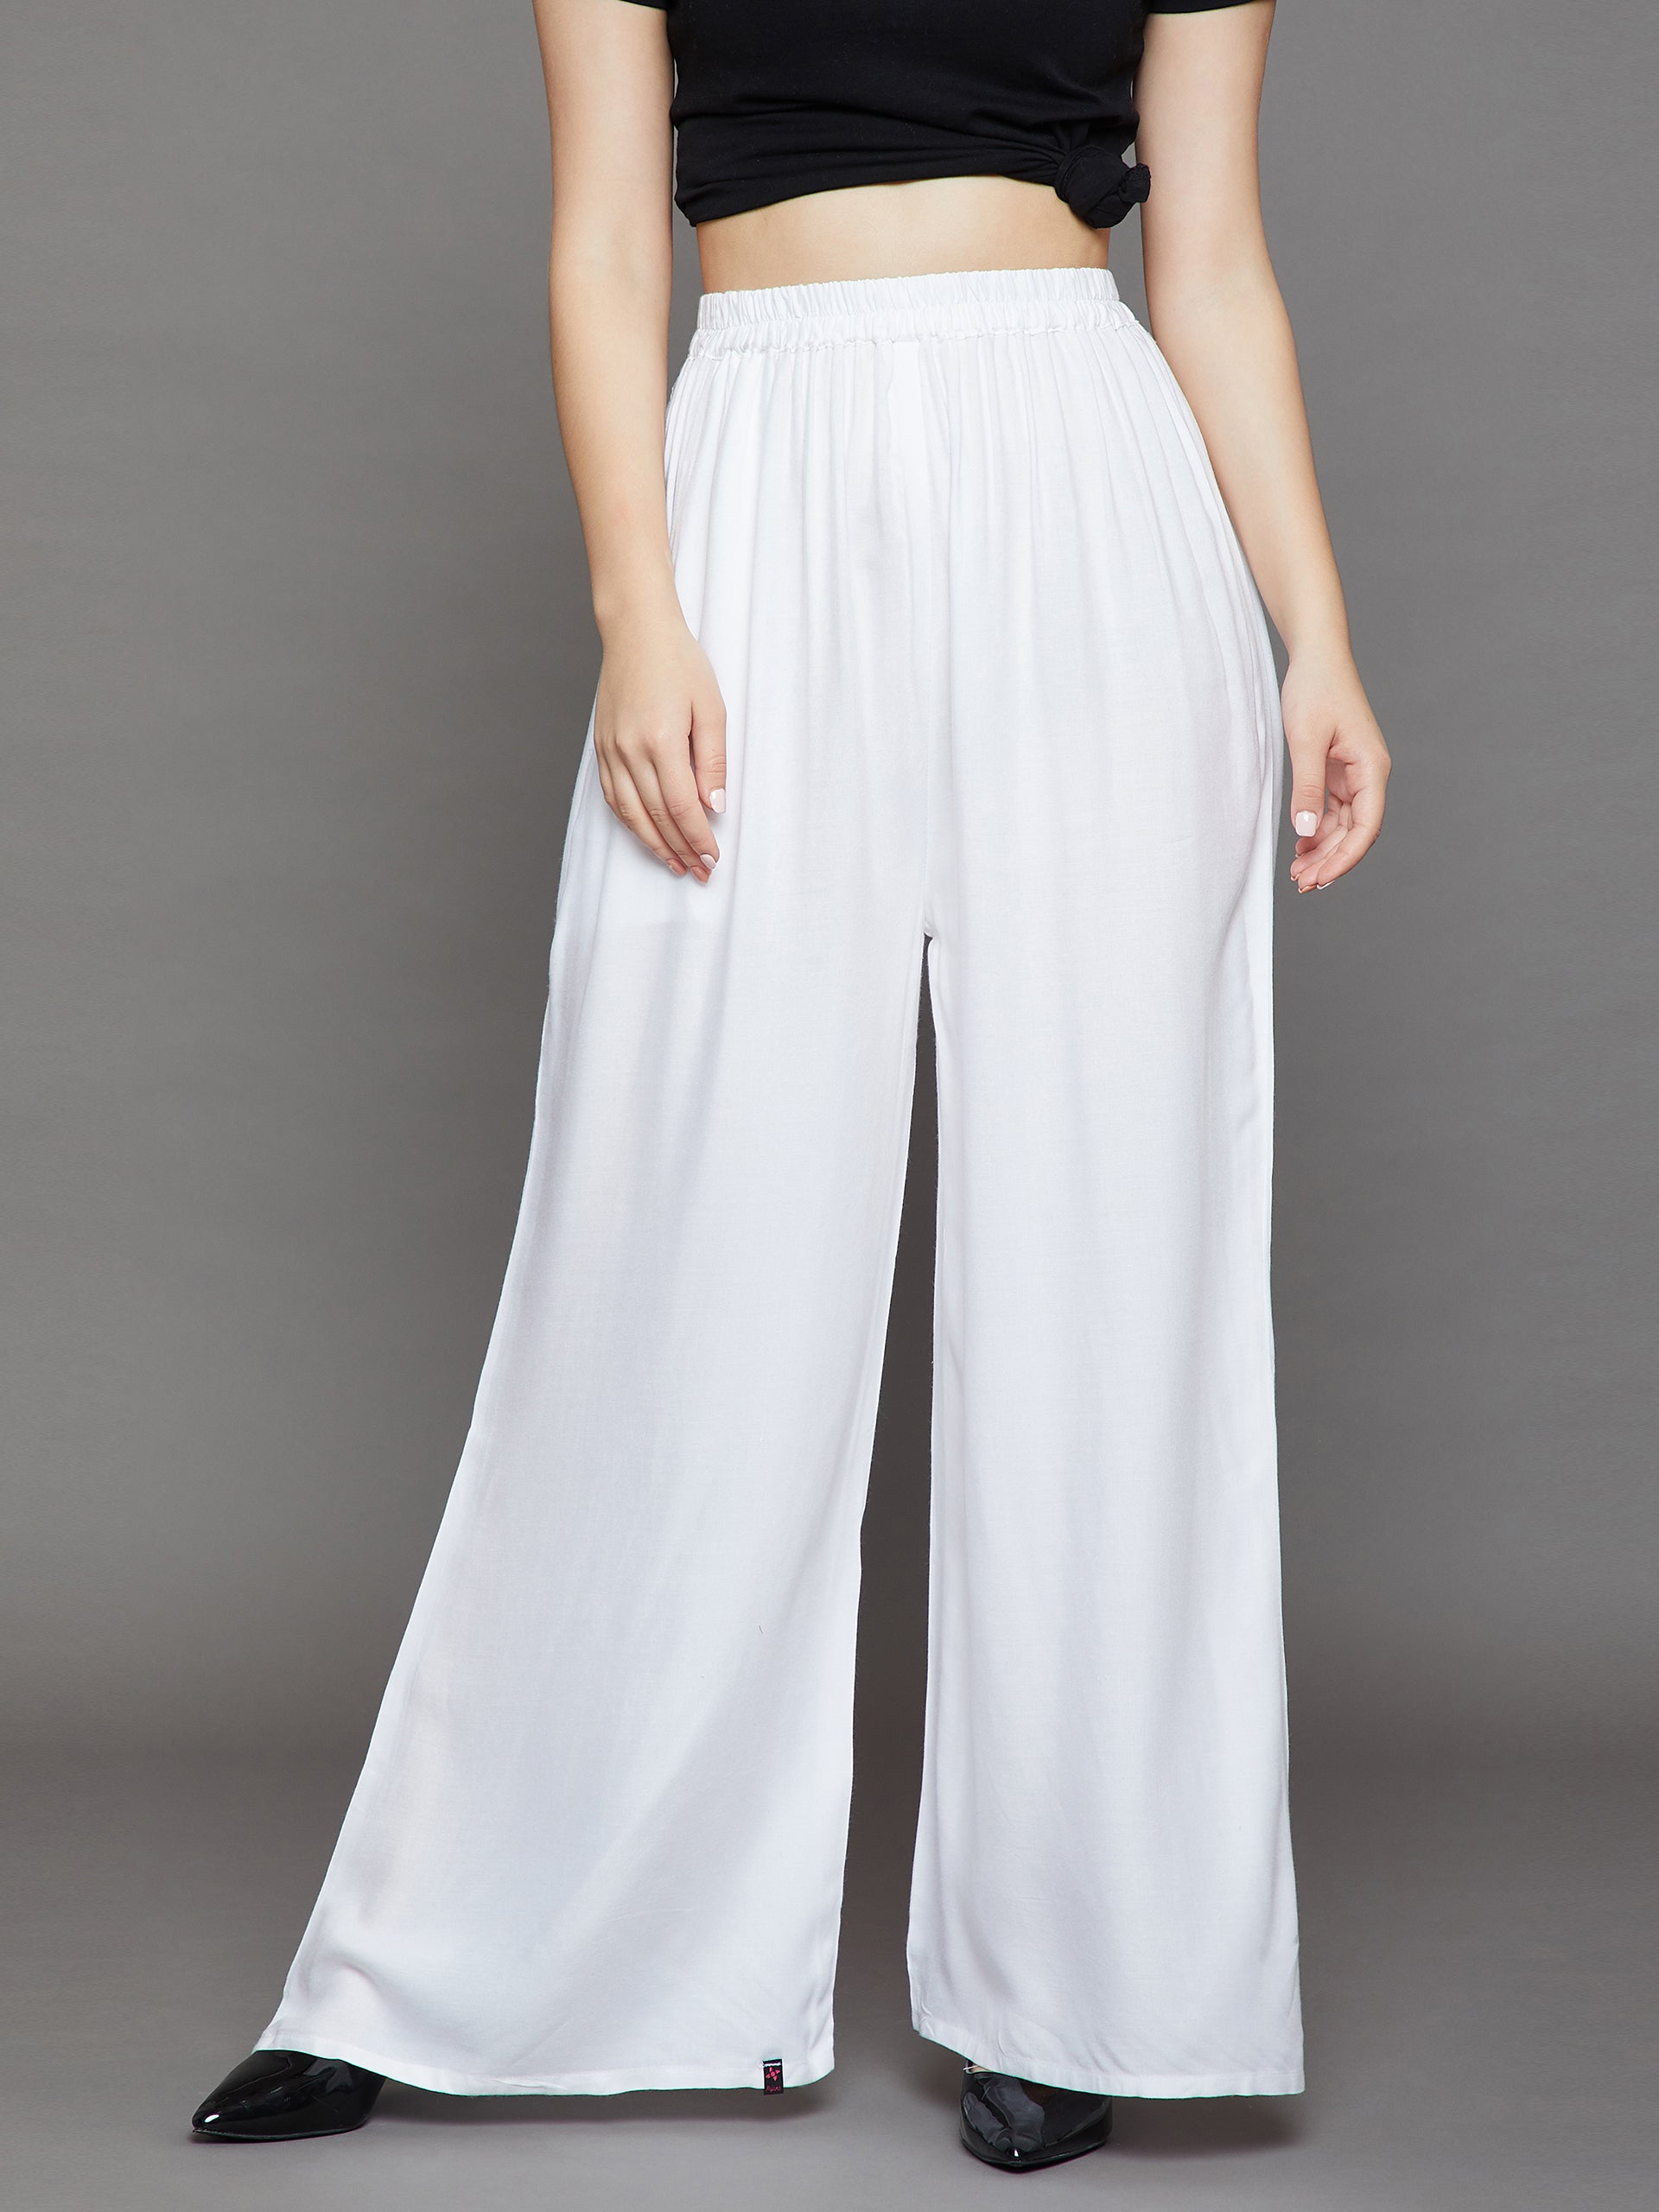 What Do You Think About PALAZZO PANTS? - The Fashion Tag Blog